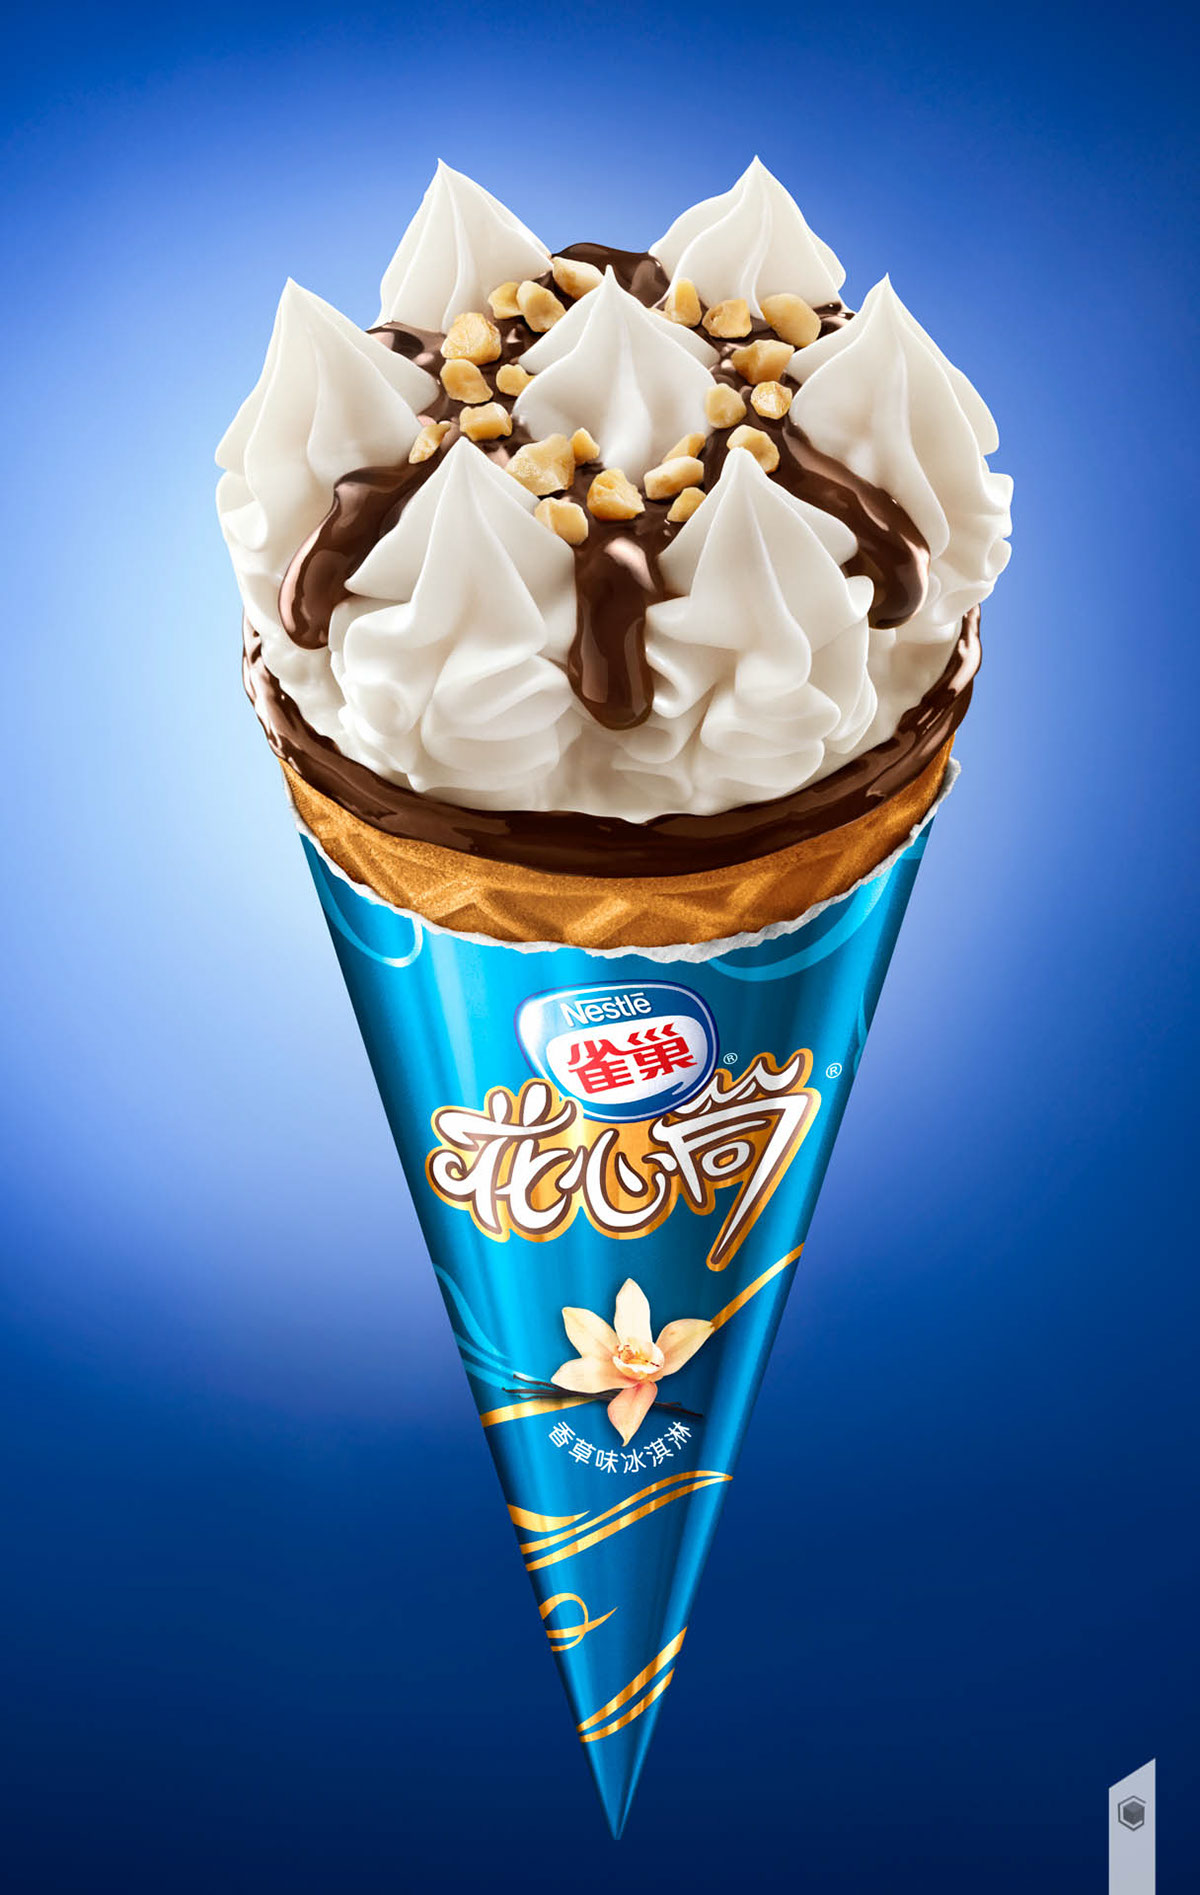 ice cream cone drumstick china product nestle